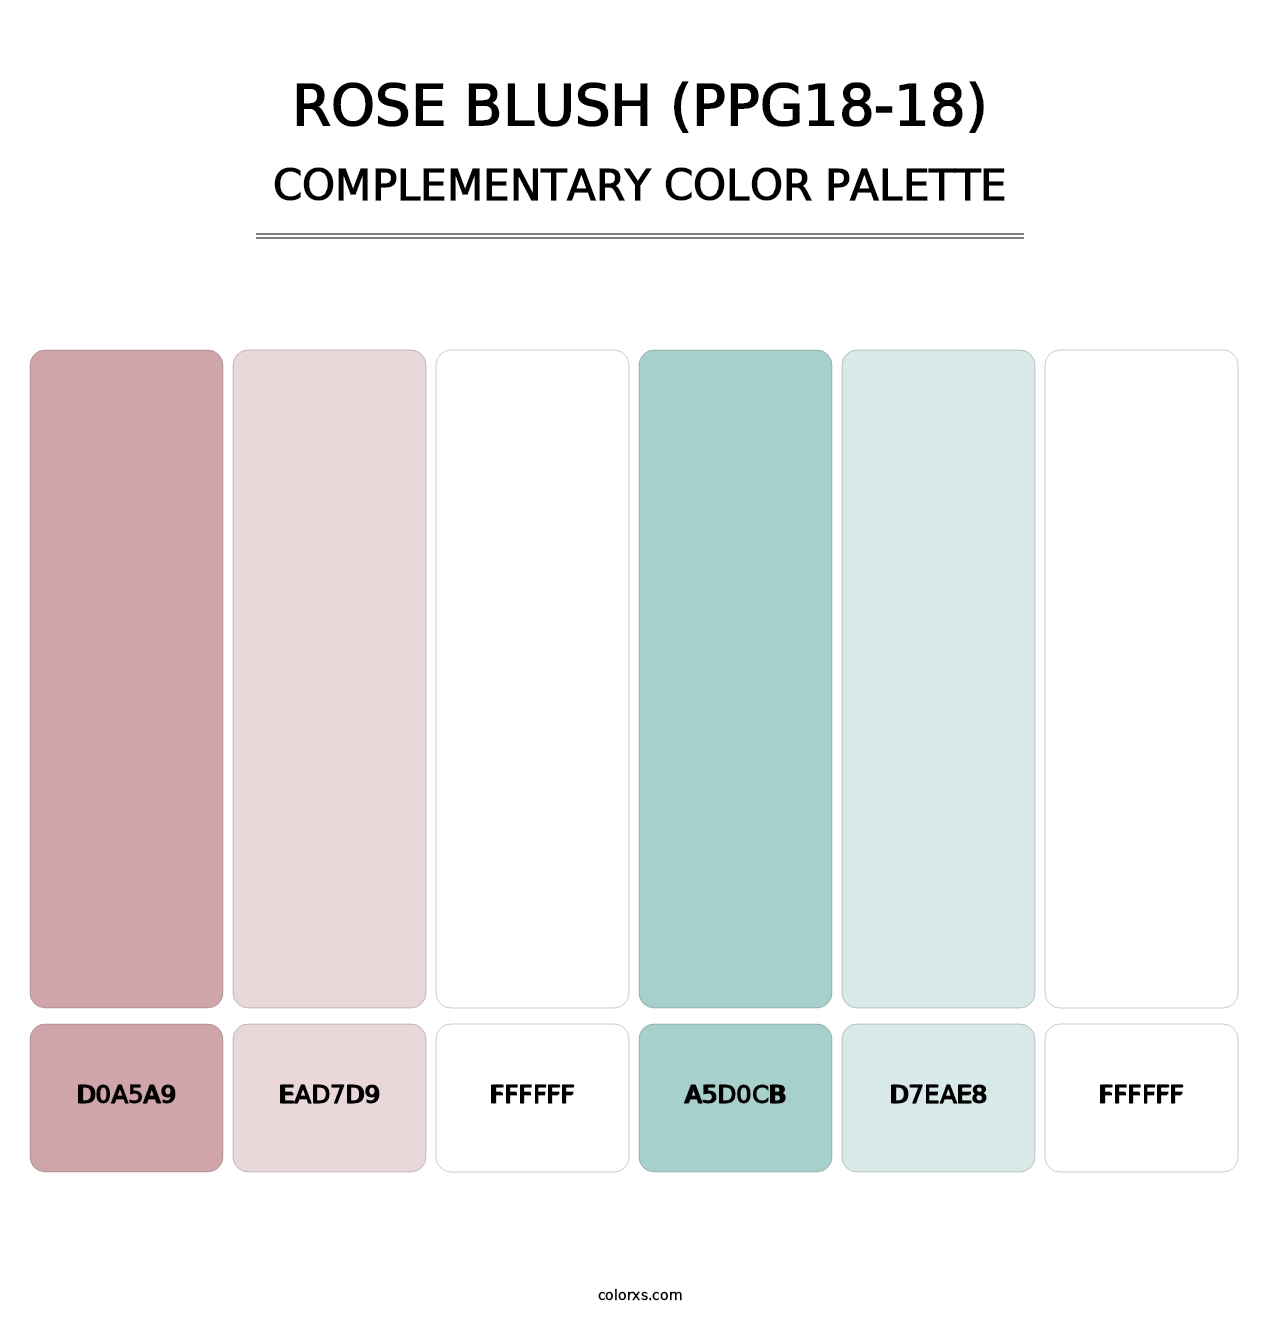 Rose Blush (PPG18-18) - Complementary Color Palette